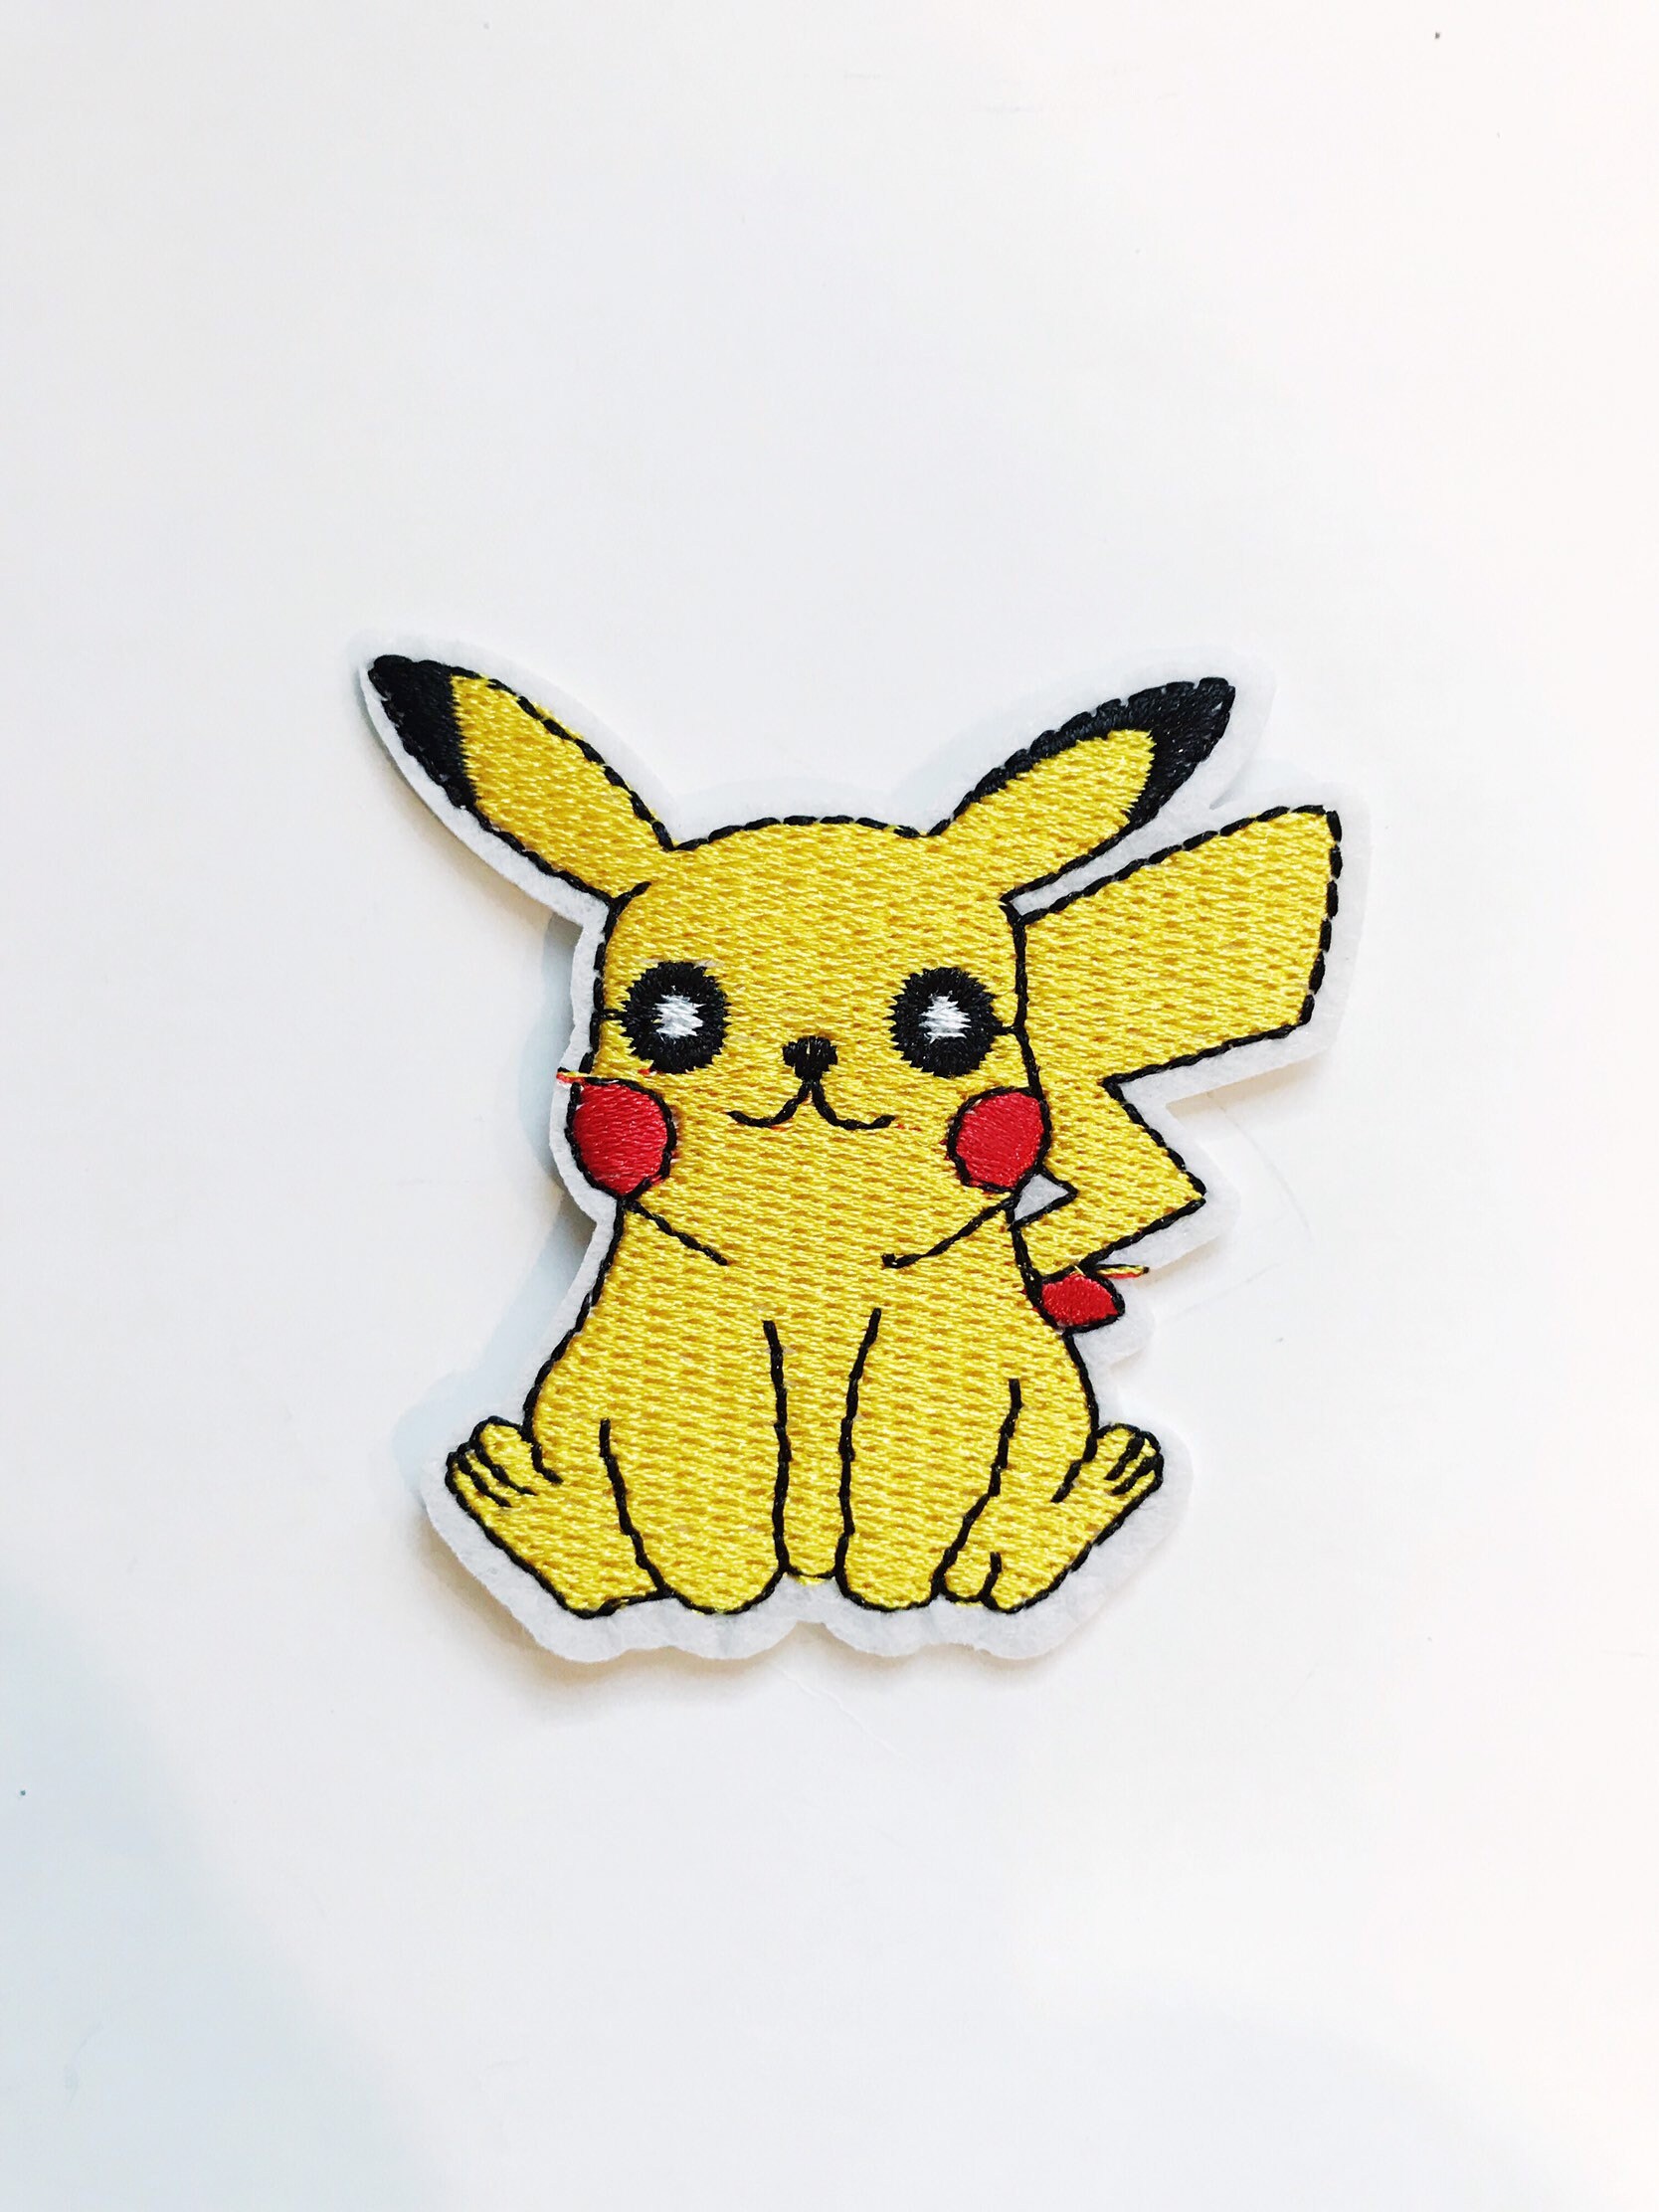 16pcs Pokemon Patch Cloth Pikachu Clothes Stickers Sew on Embroidery  Patches Applique Iron on Clothing Cartoon